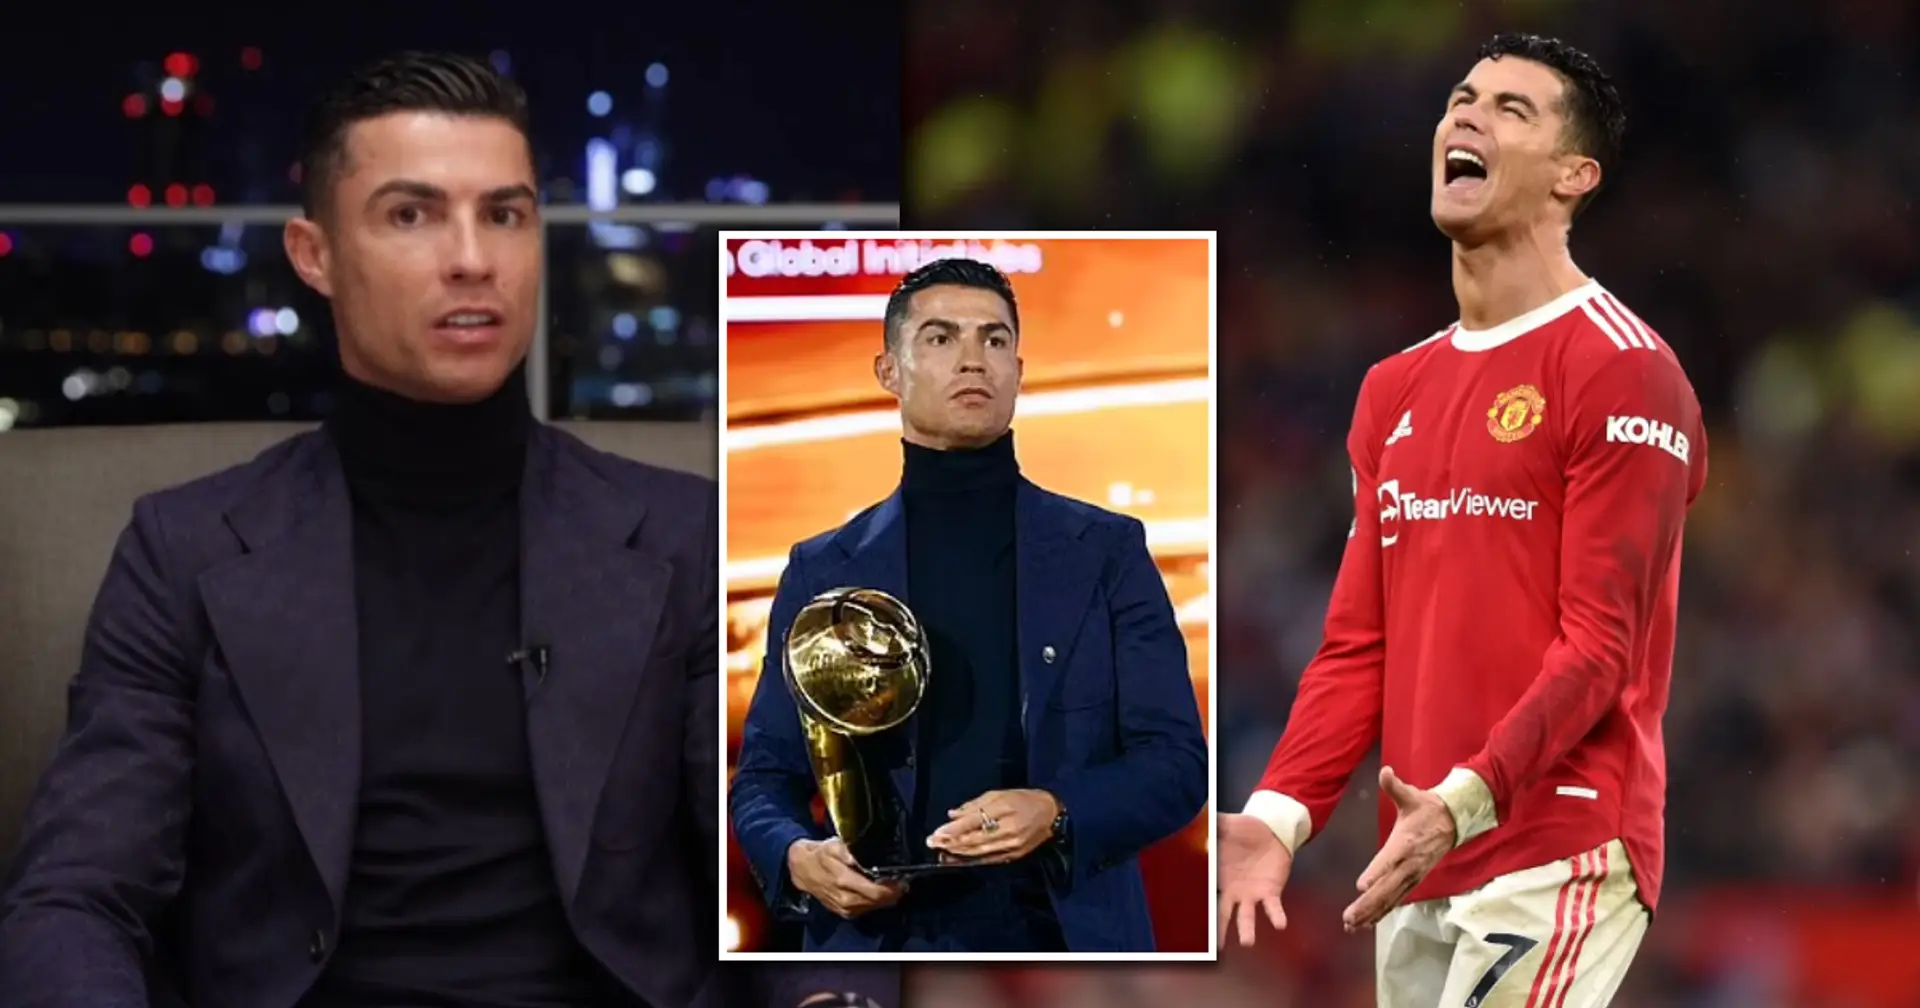 'I'm not surprised of my level': Ronaldo on his 54 Al Nassr goals after people 'considered him lost' at Man United 